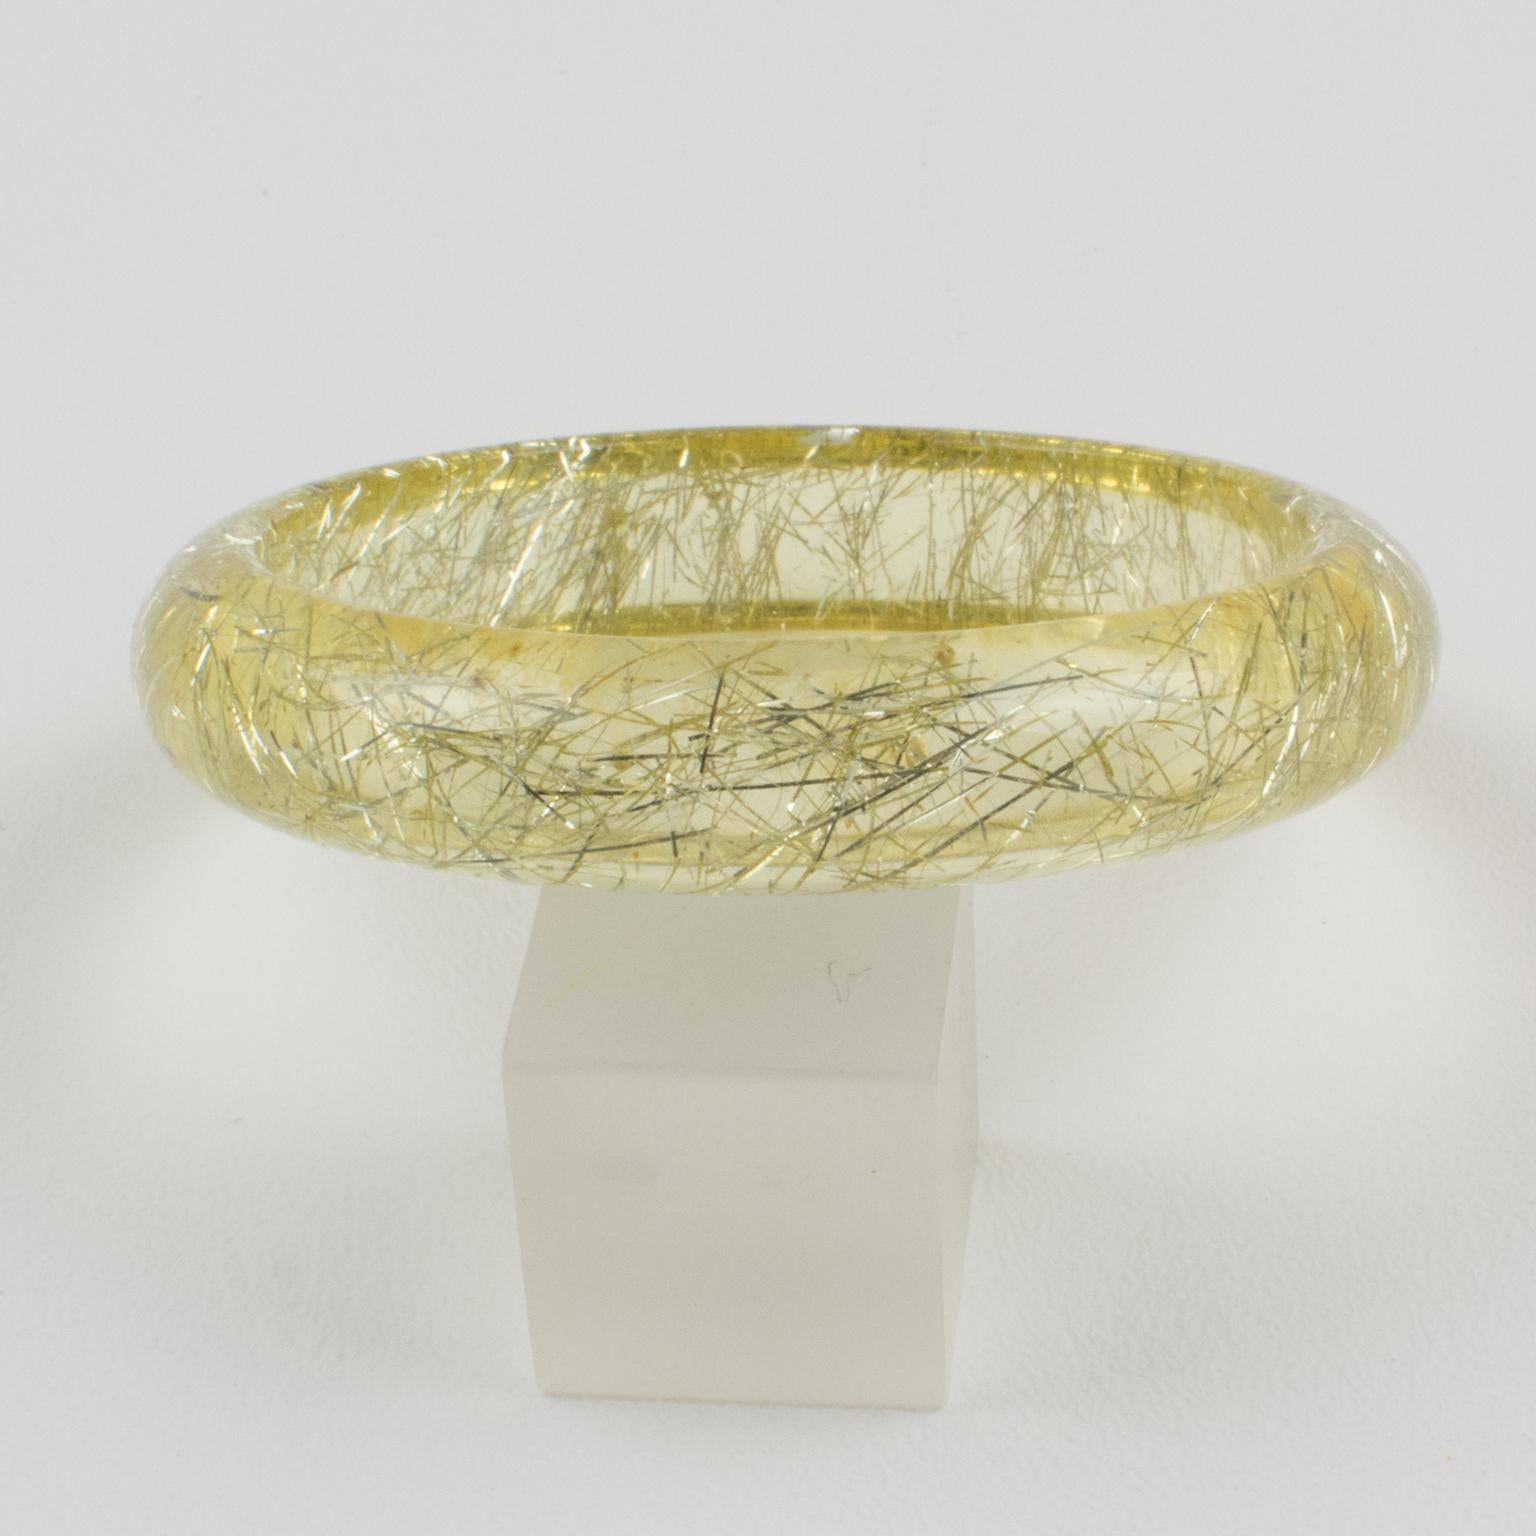 Modern Lucite Bracelet Bangle Yellow Lemon with Silver Metallic Thread Inclusions For Sale